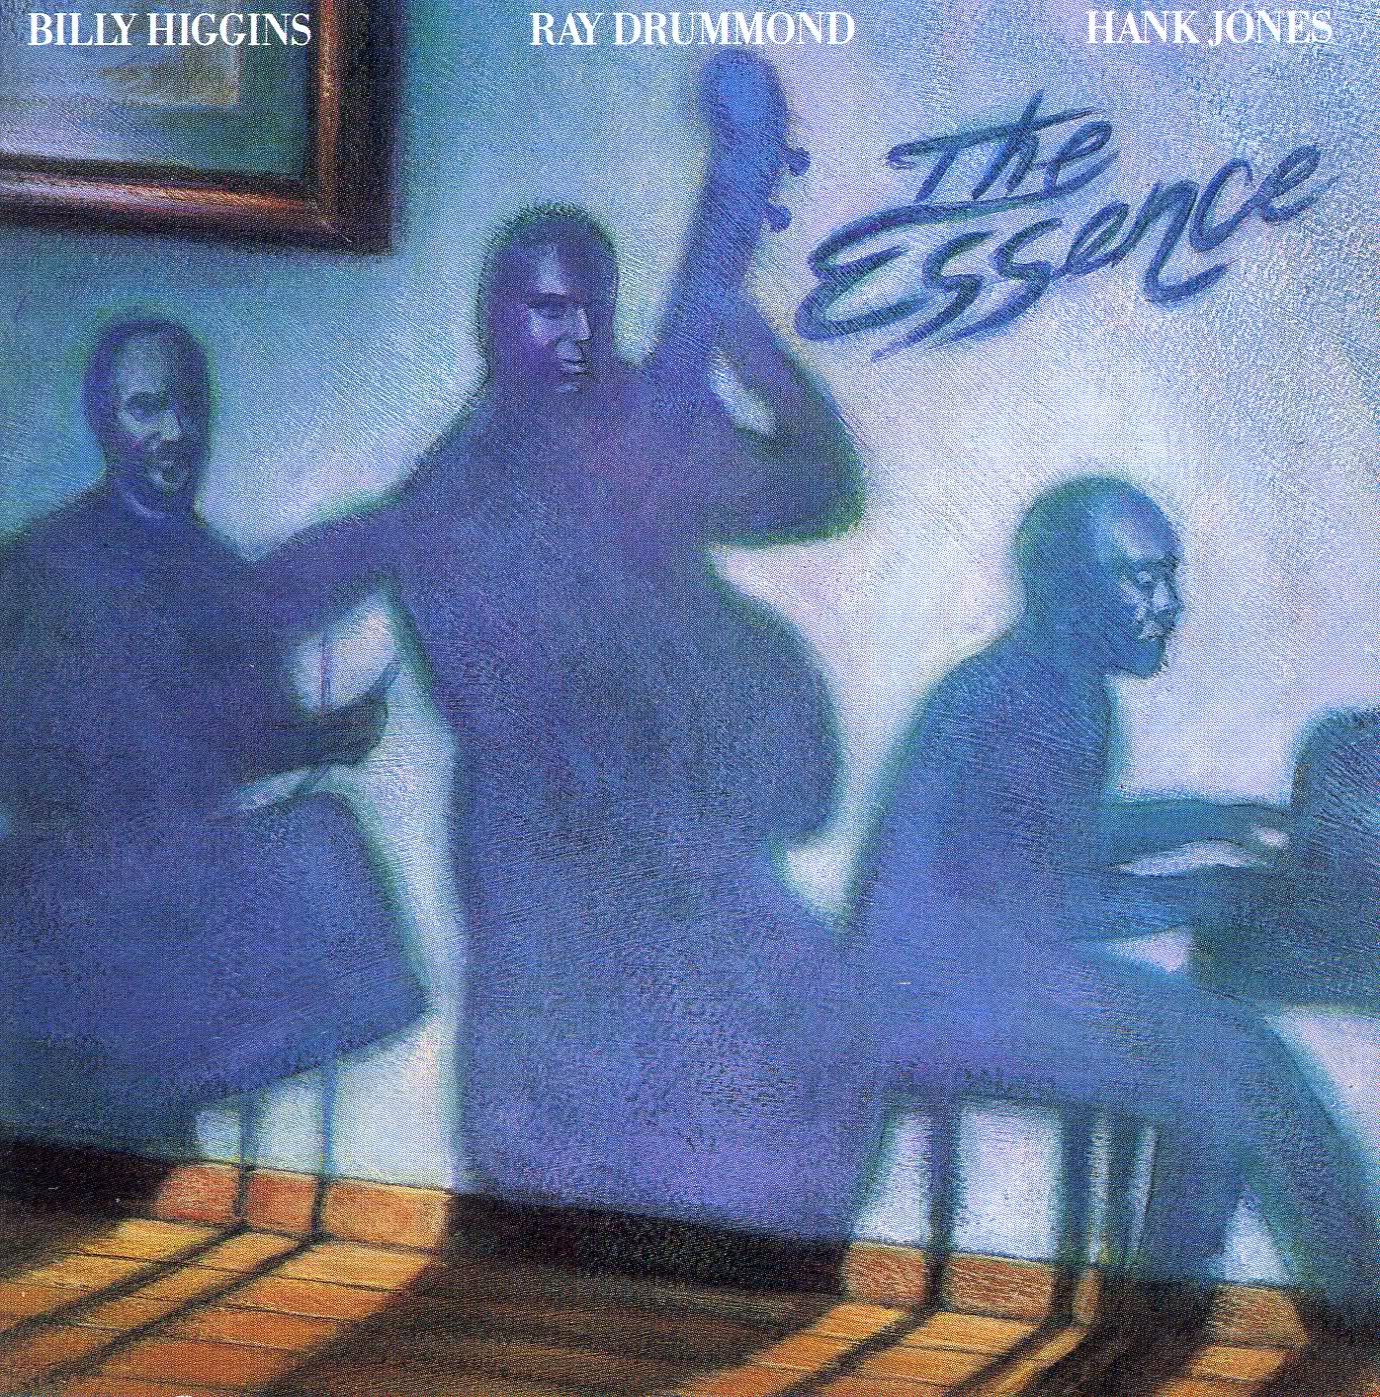 BILLY HIGGINS - The Essence (with Ray Drummond & Hank Jones) cover 